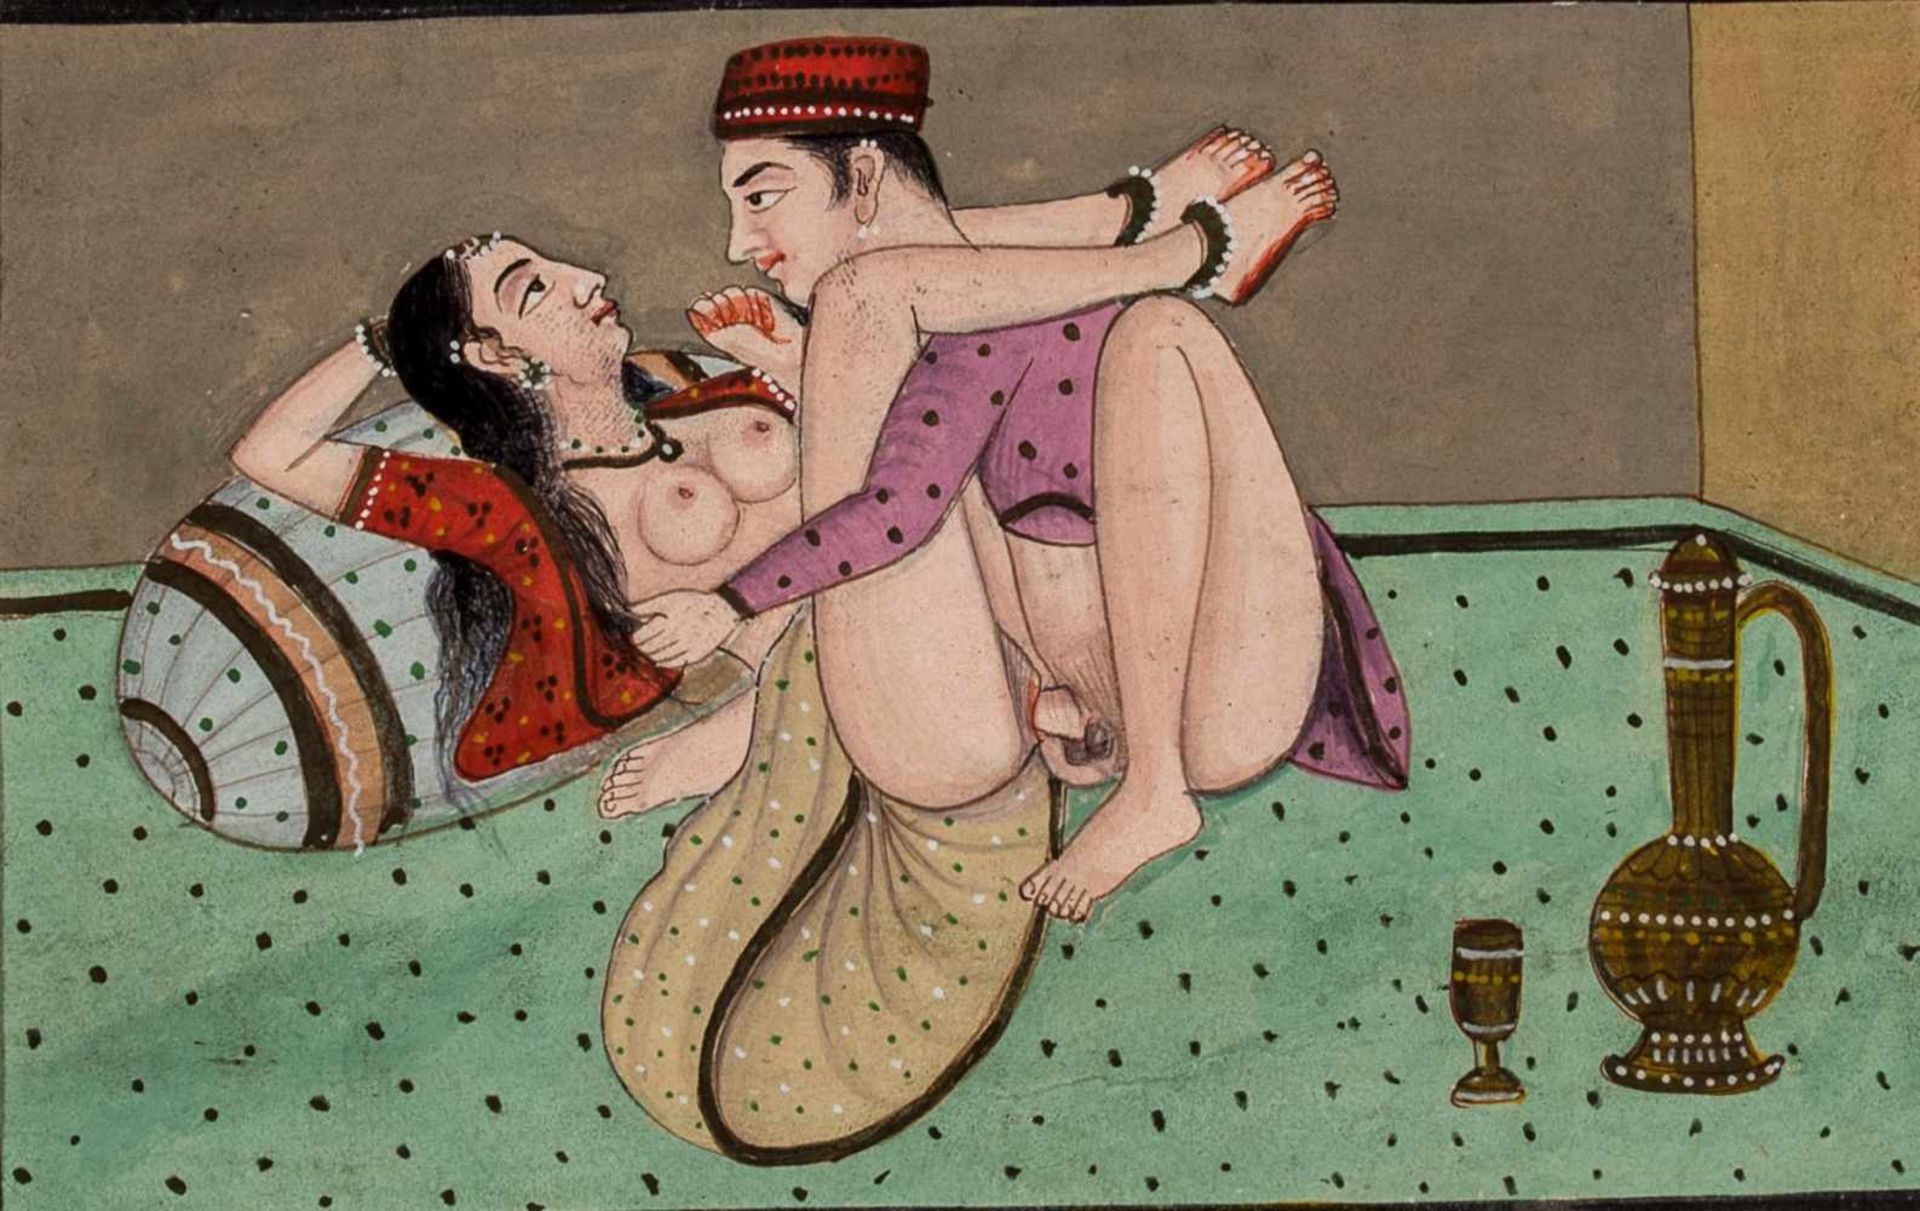 AN EROTIC MINIATURE PAINTING - INDIA, 19TH – EARLY 20th CENTURYGouache on paper, with